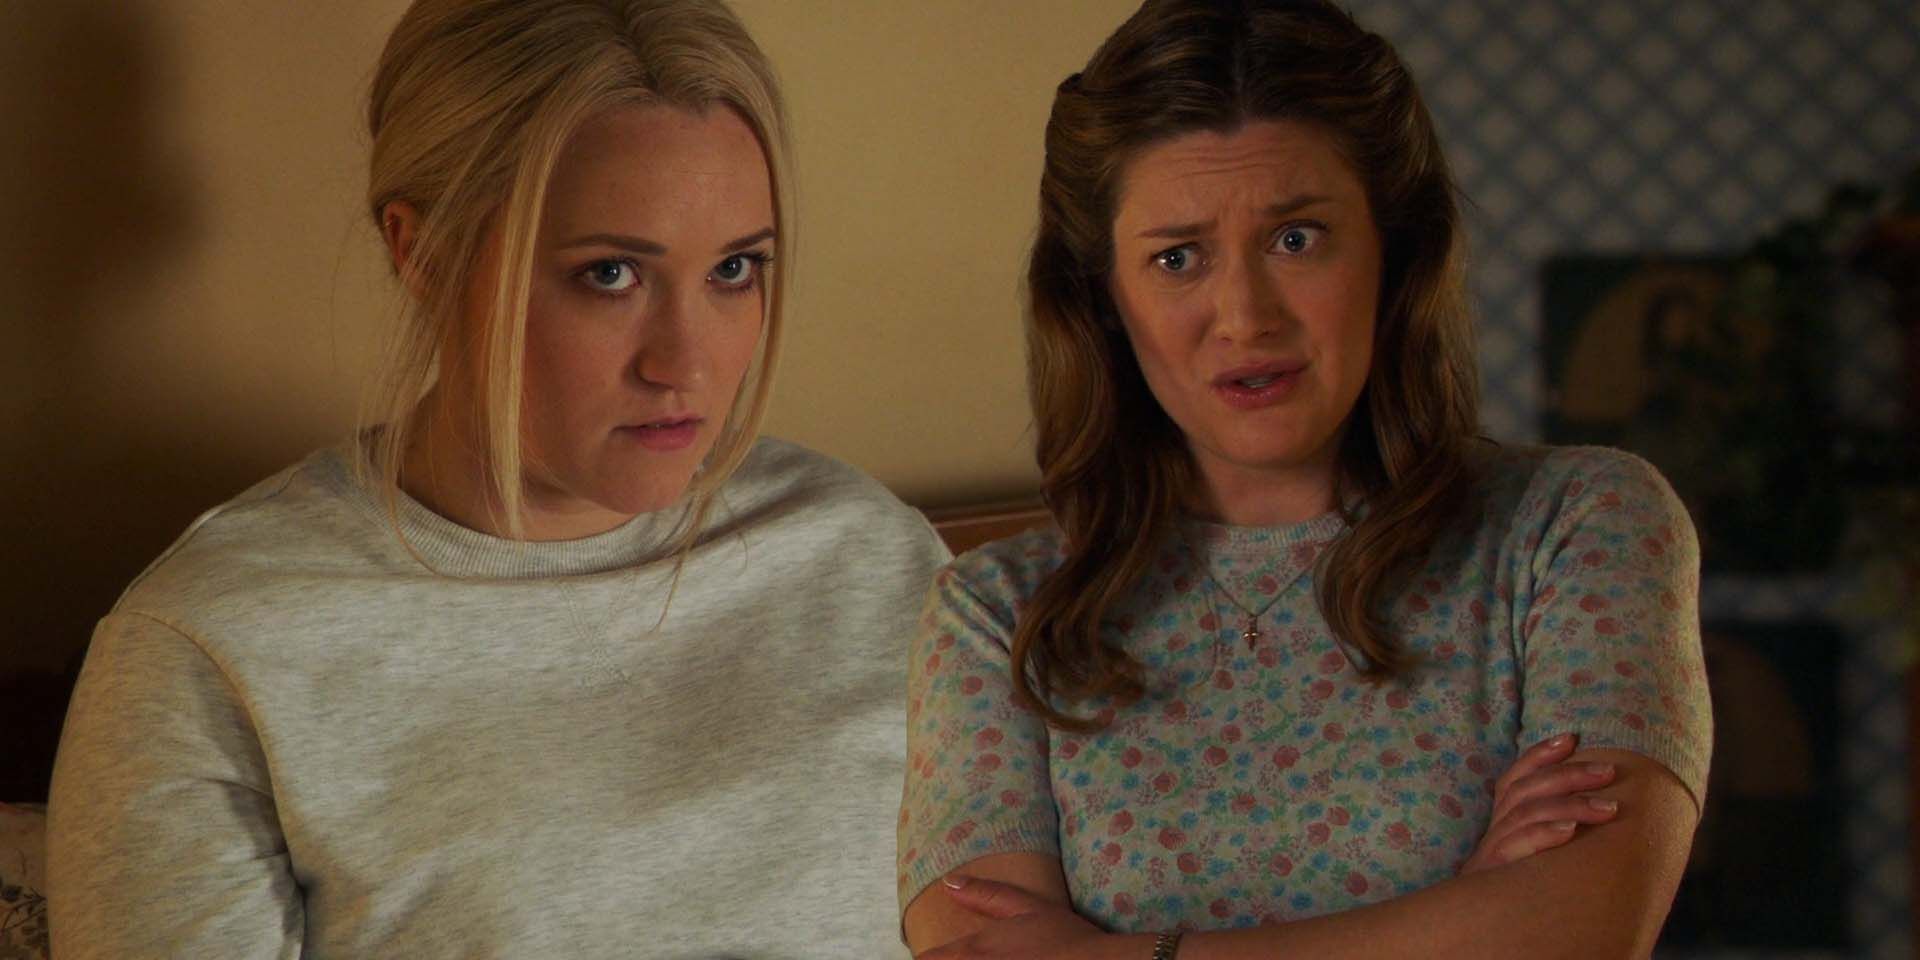 Emily Osment as Mandy and Zoe Perry as Mary Cooper in Young Sheldon S06E11